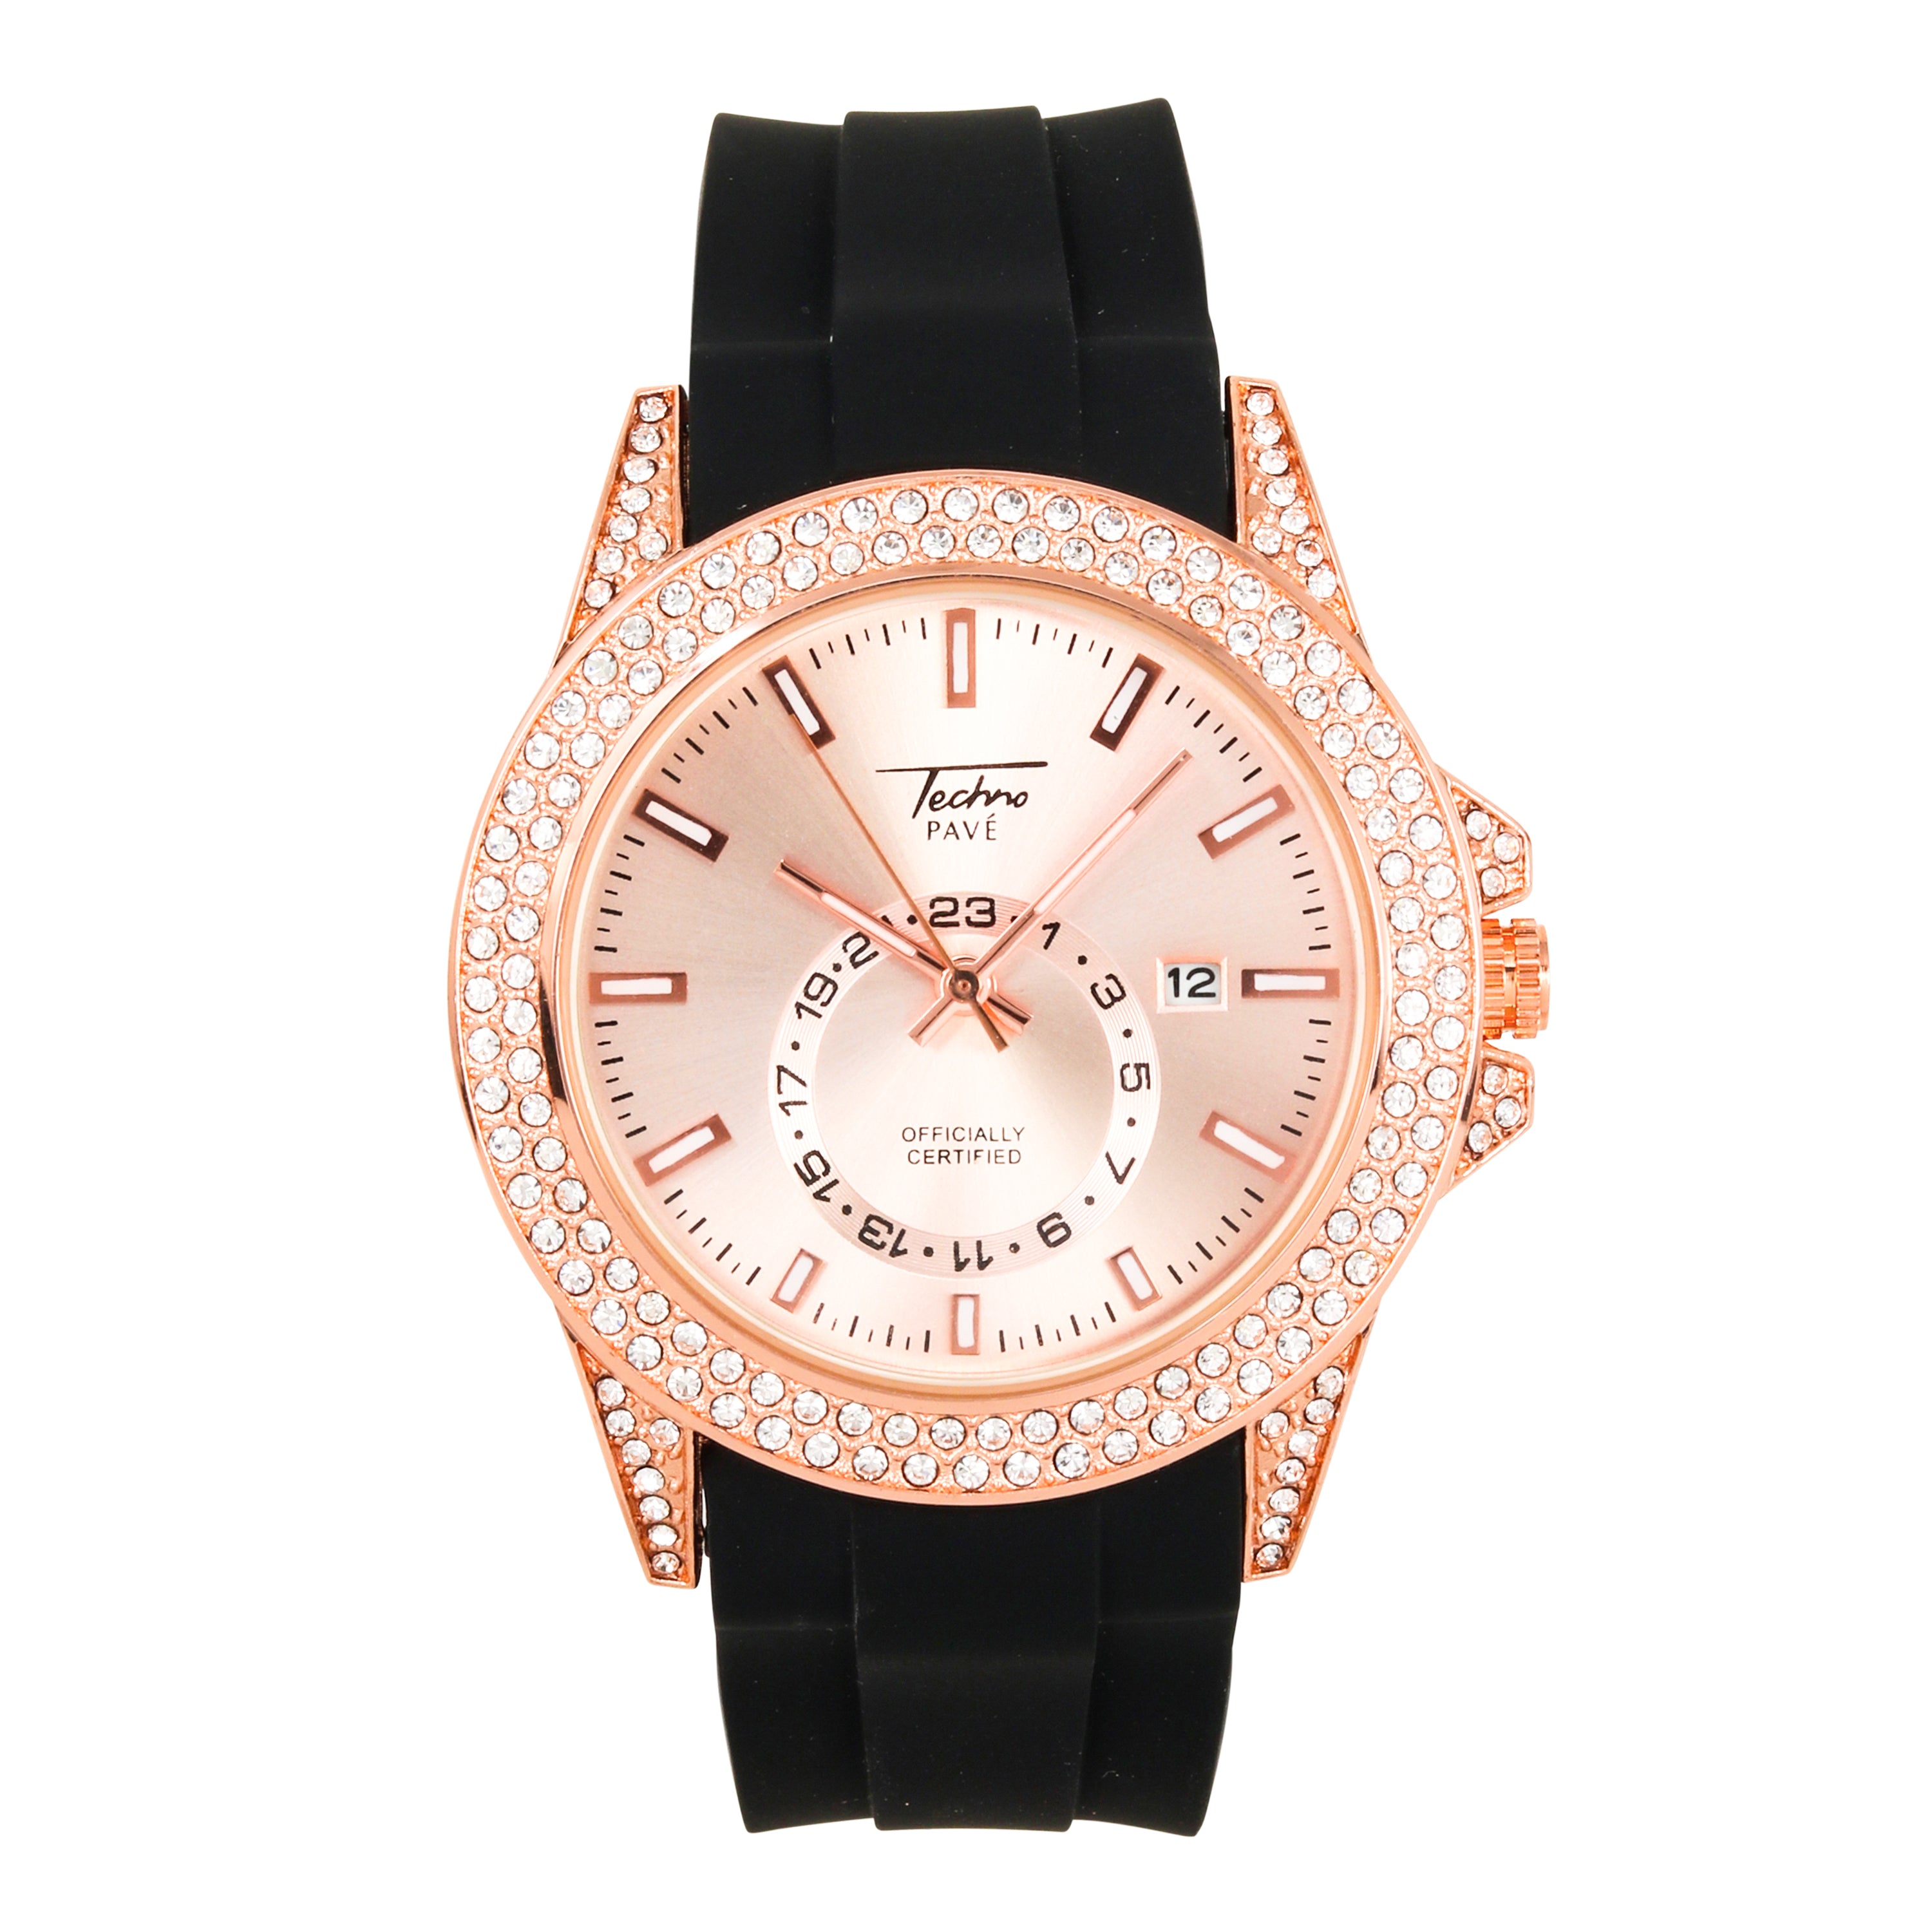 Men's Iced Out Watch 42mm Rose - Silicon Band